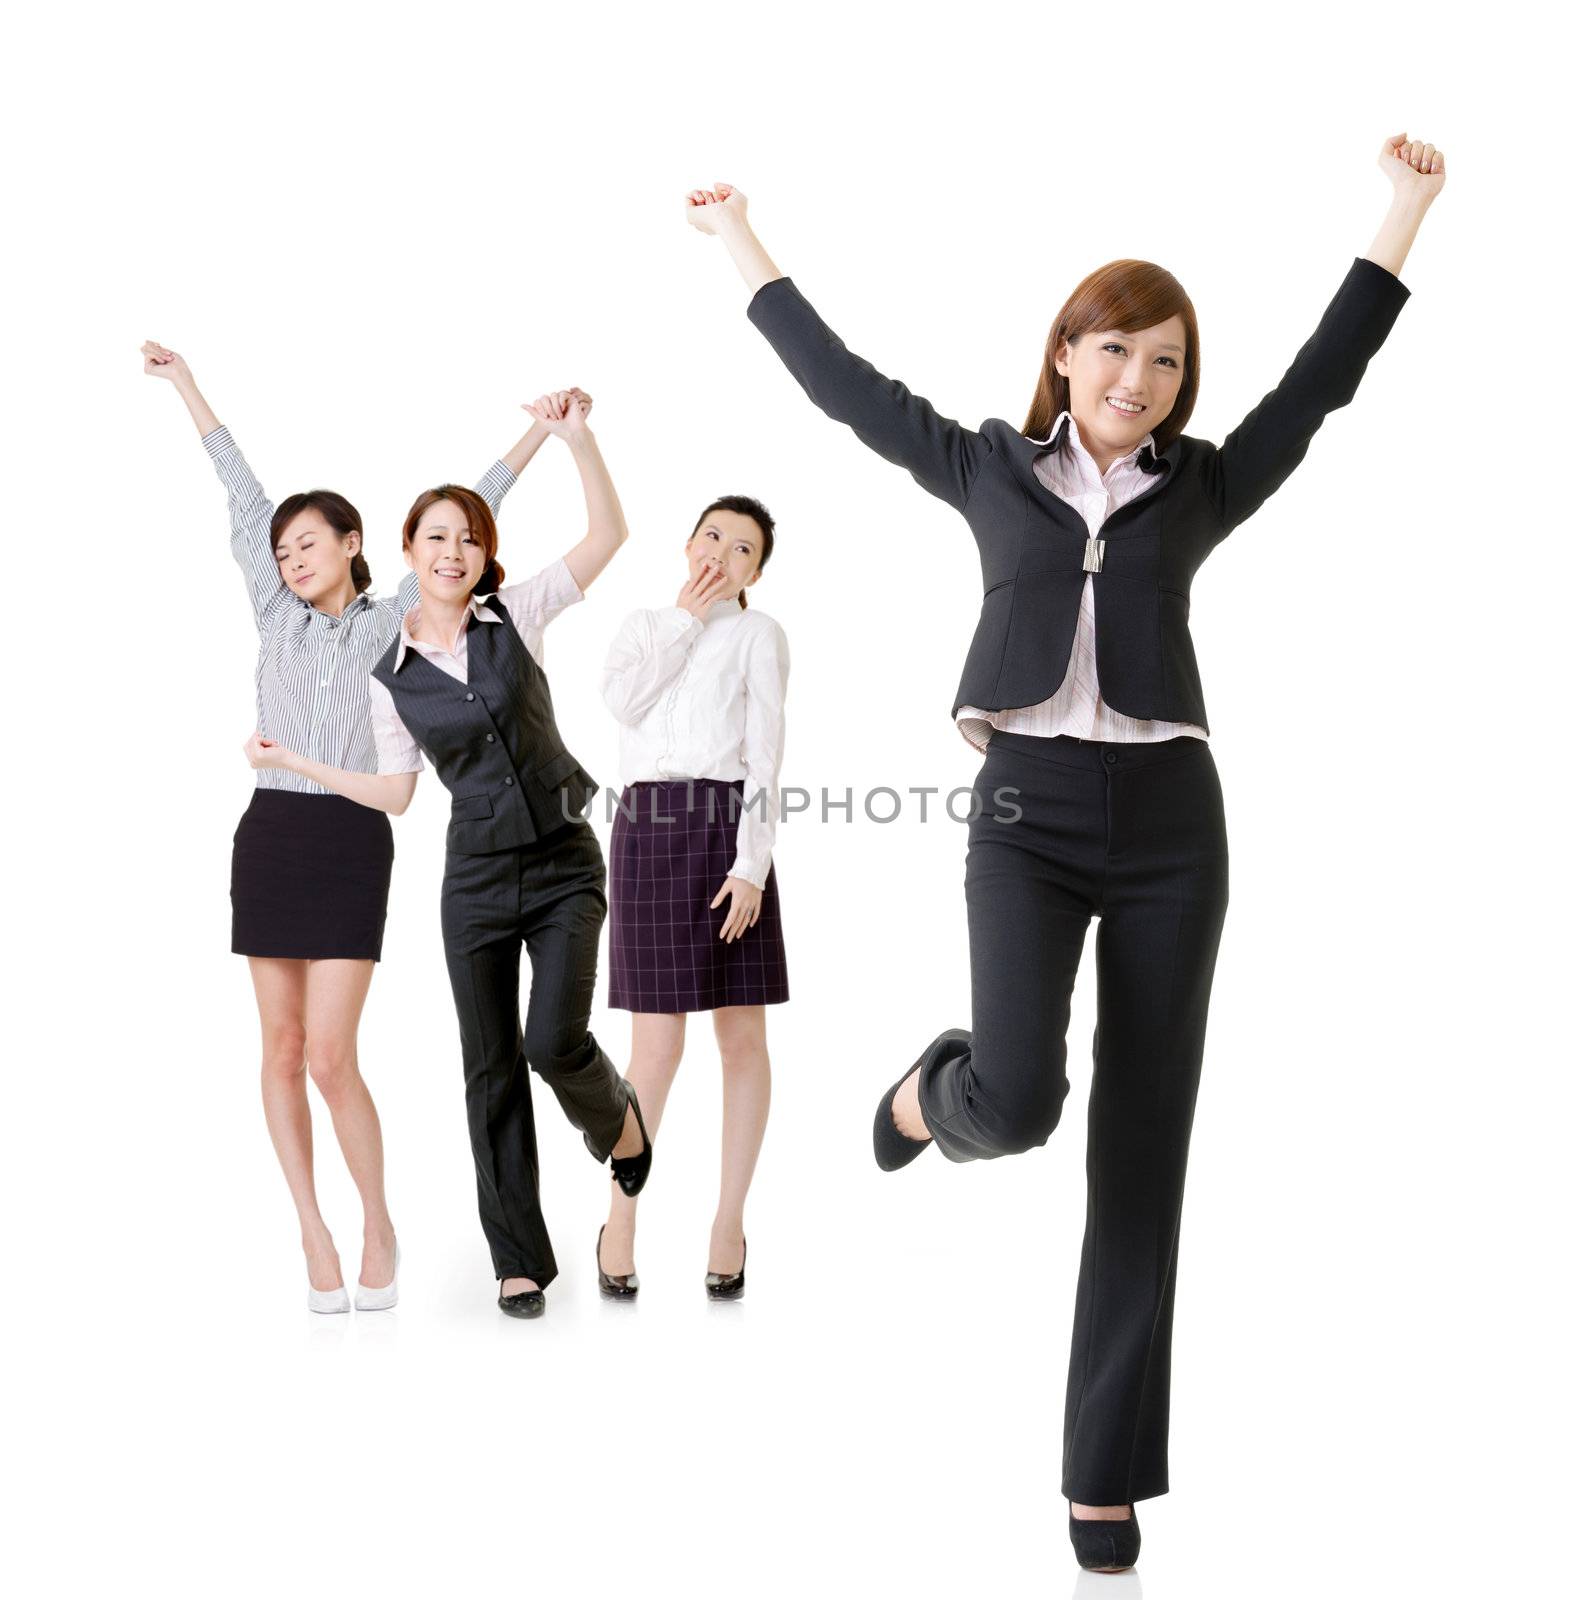 Excited business women, full length portrait of group people isolated on white background.